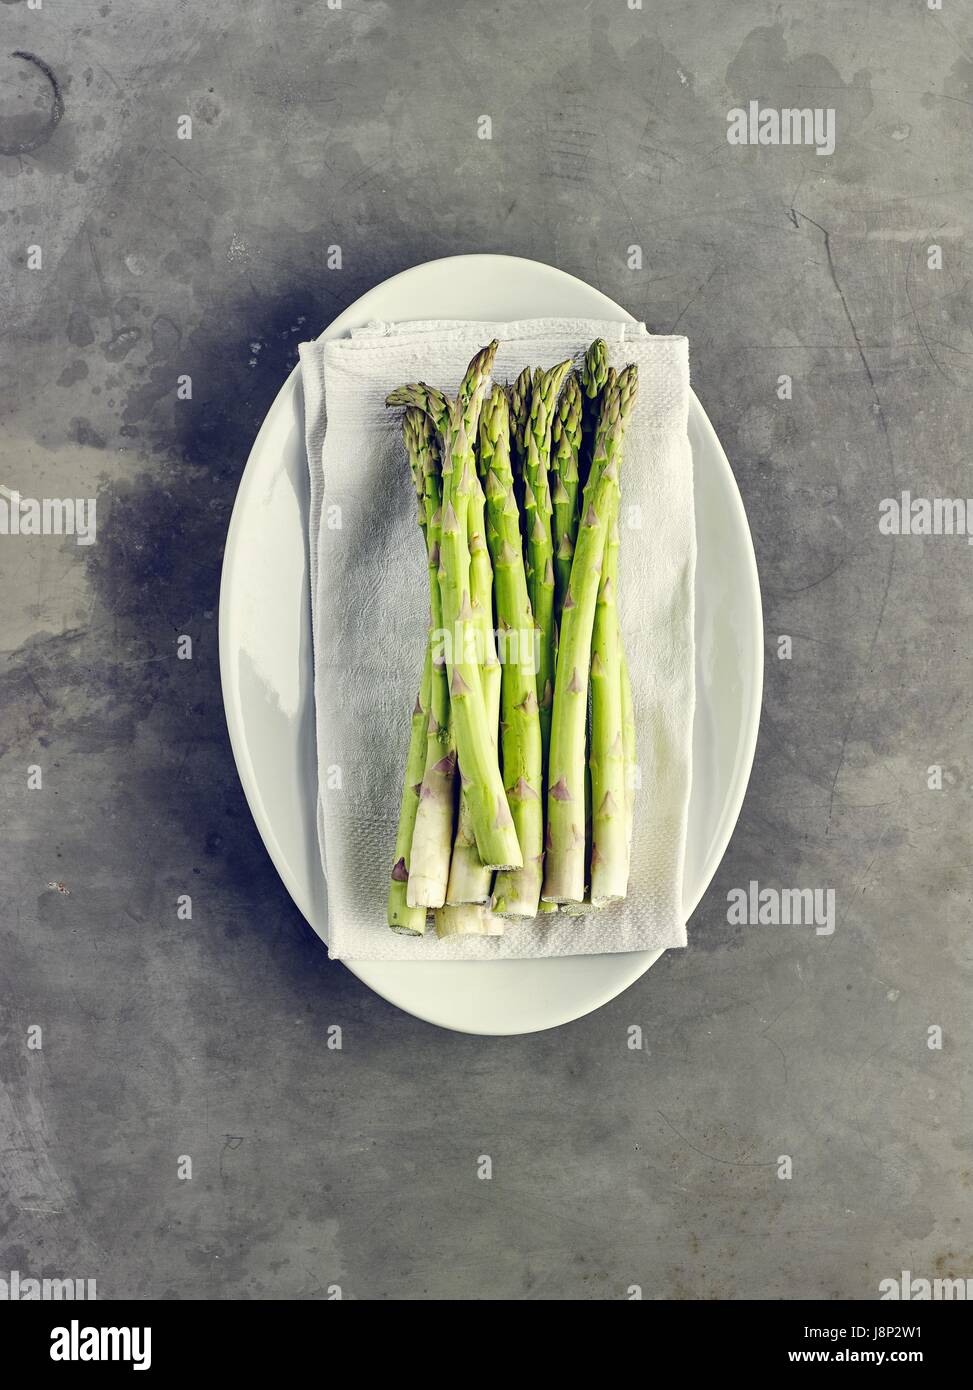 Green asparagus on oval plate Stock Photo